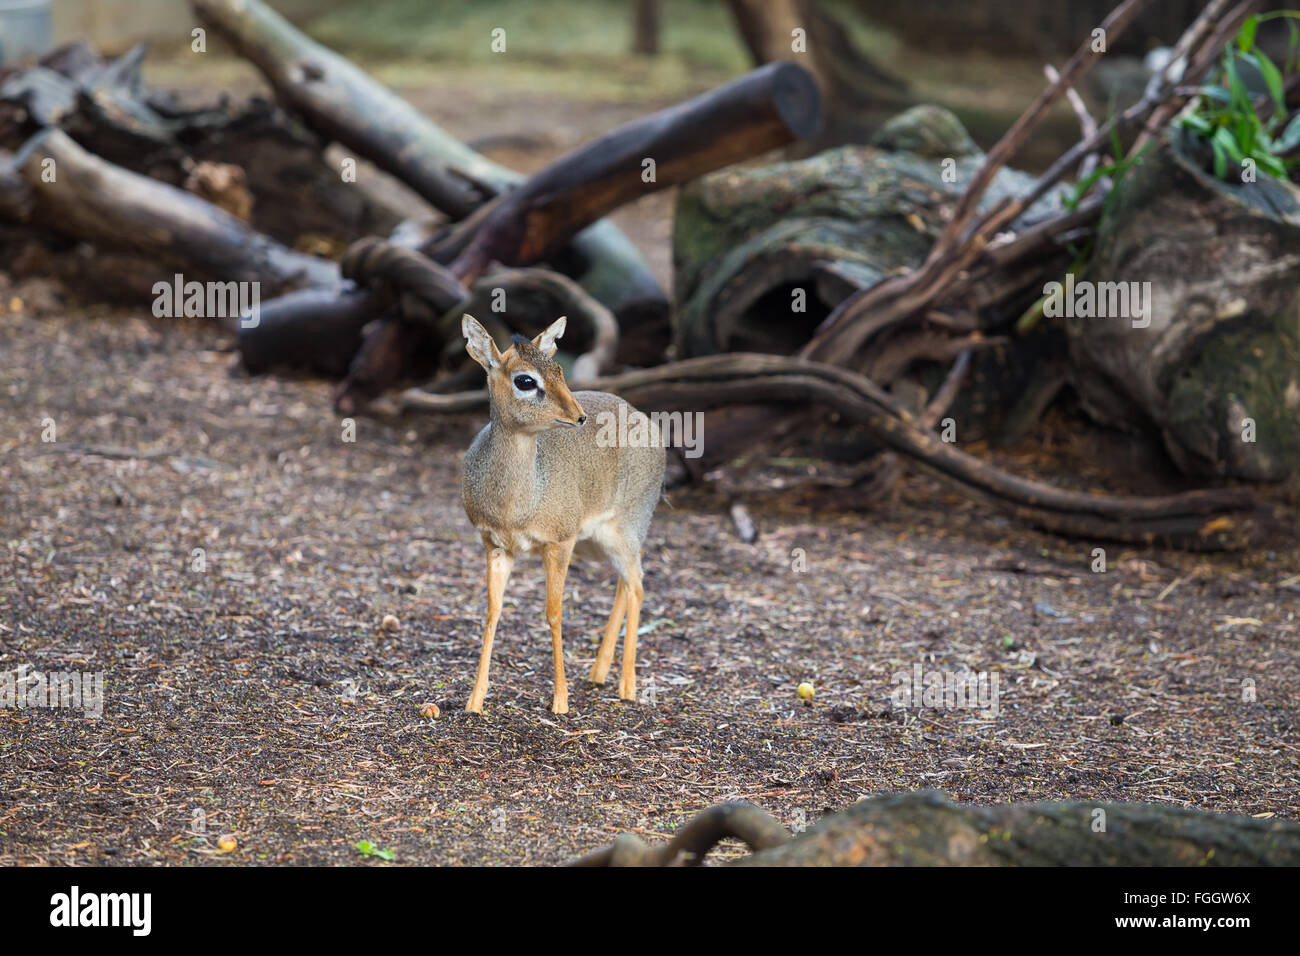 Miniature African Deer fawn on some wood chips watching out for predators. Stock Photo